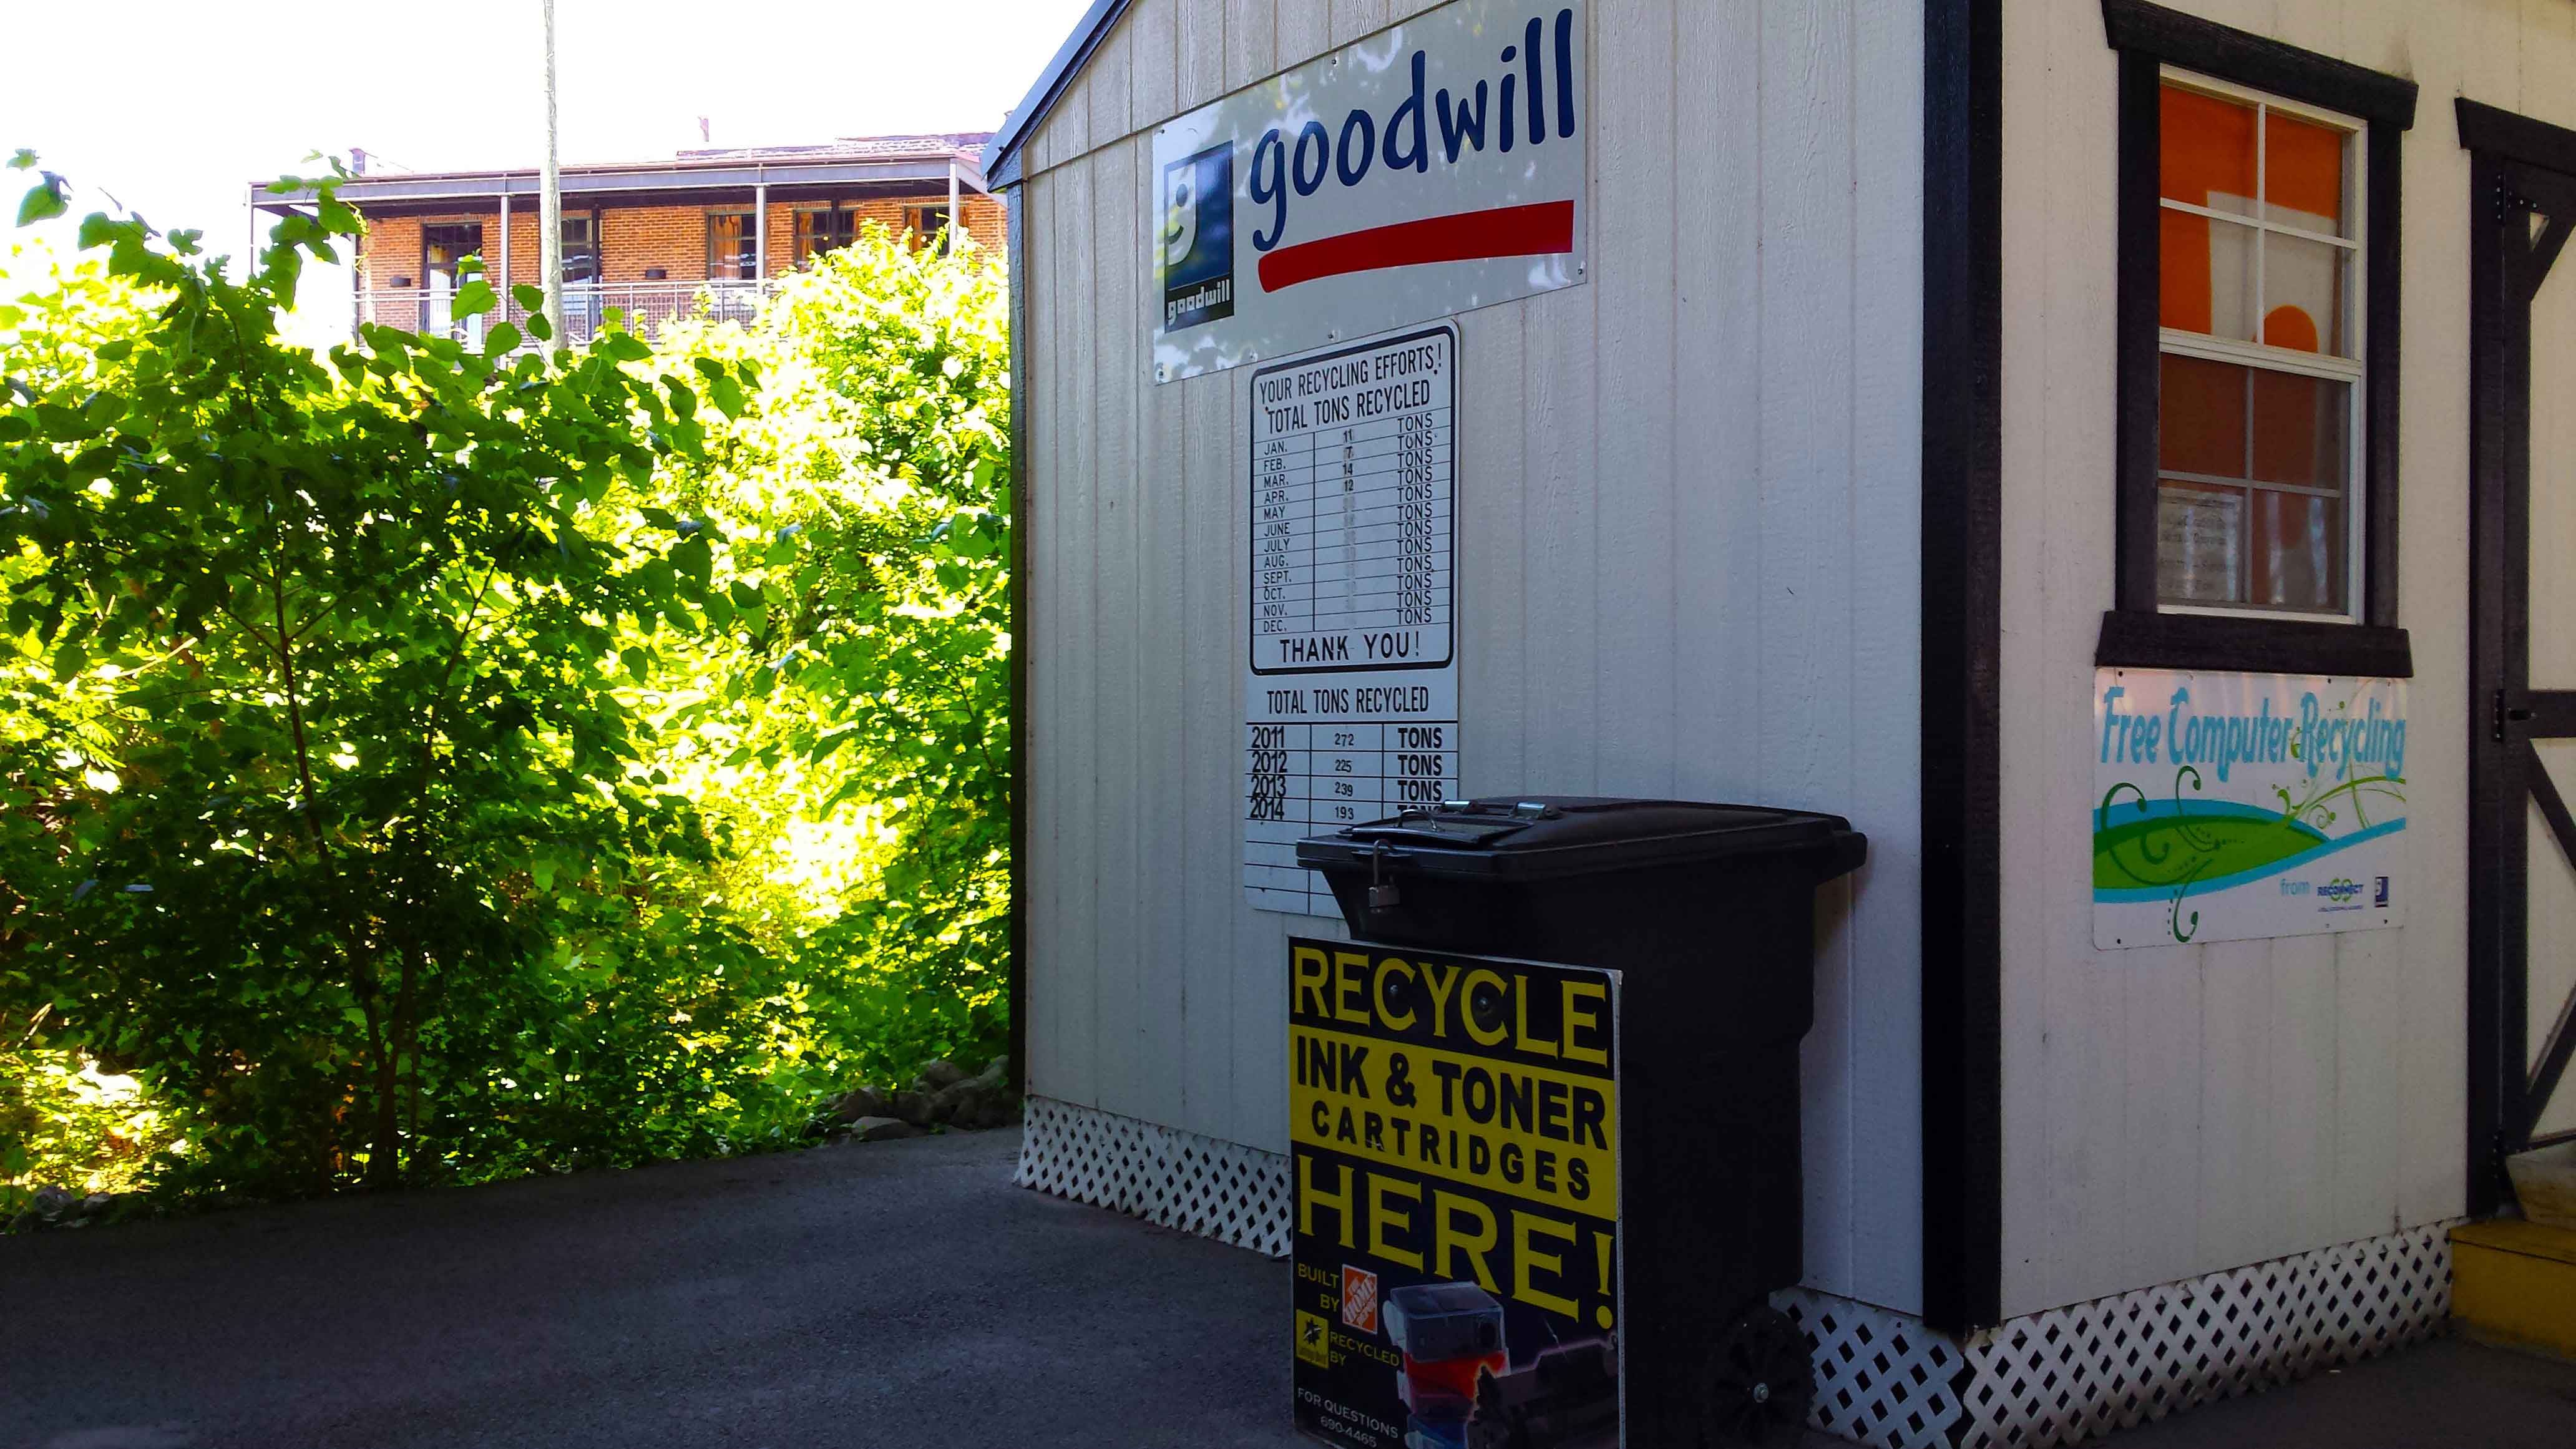 Downtown-Goodwill-Drop-Off-052315